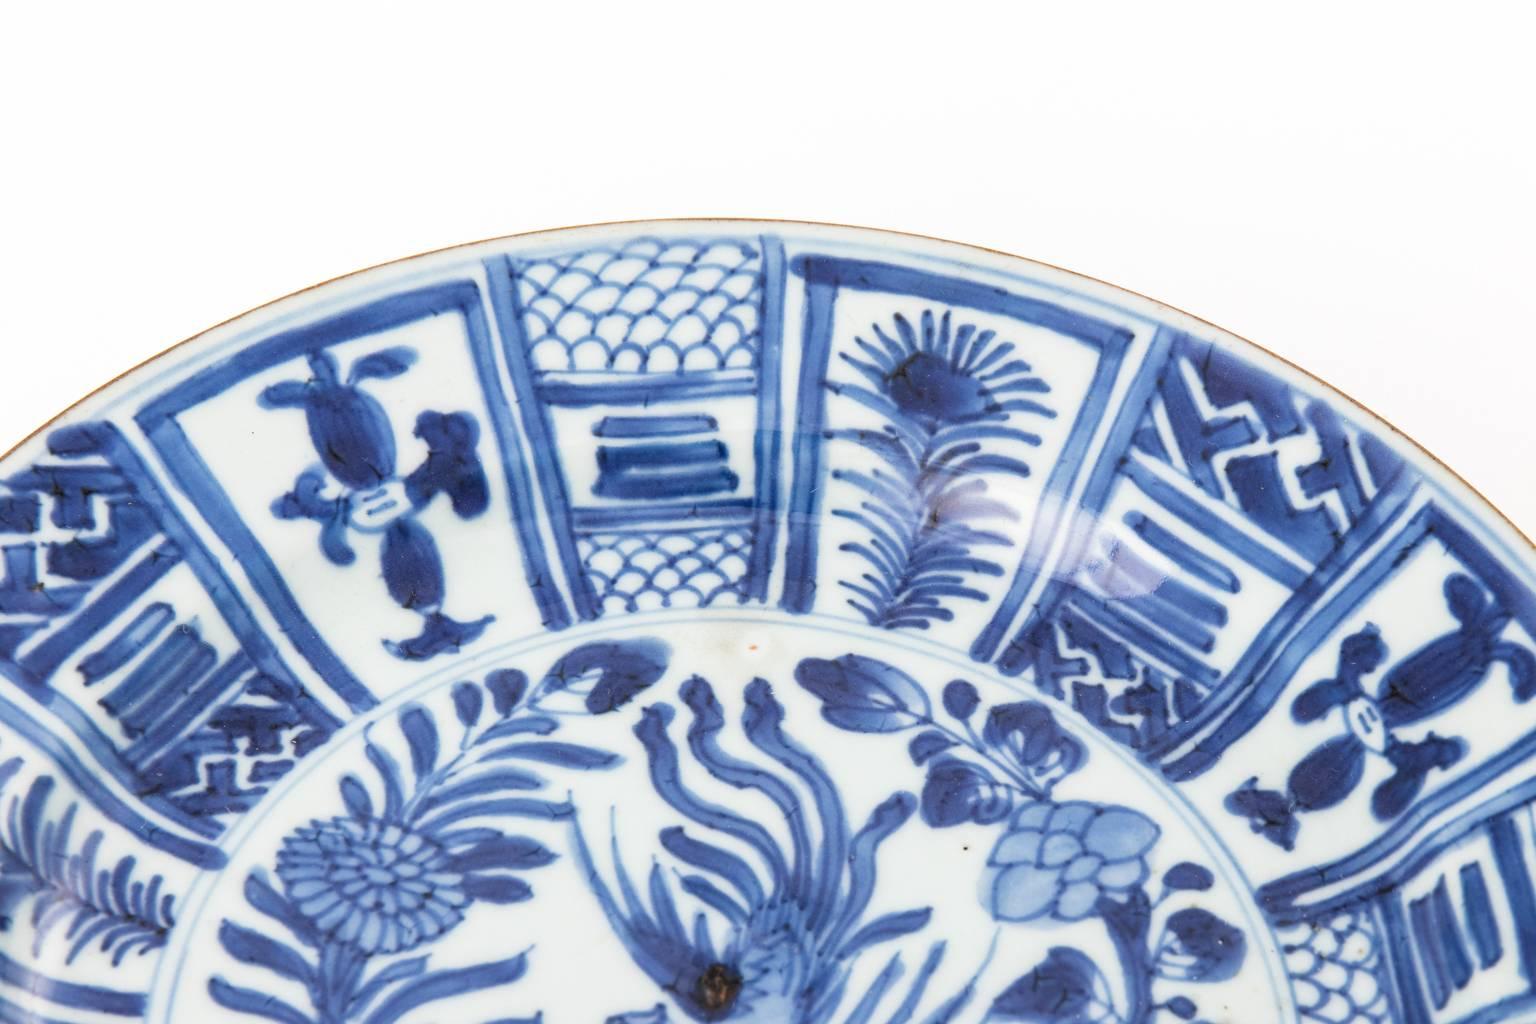 Qing Dynasty Porcelain Plate In Good Condition For Sale In Stamford, CT